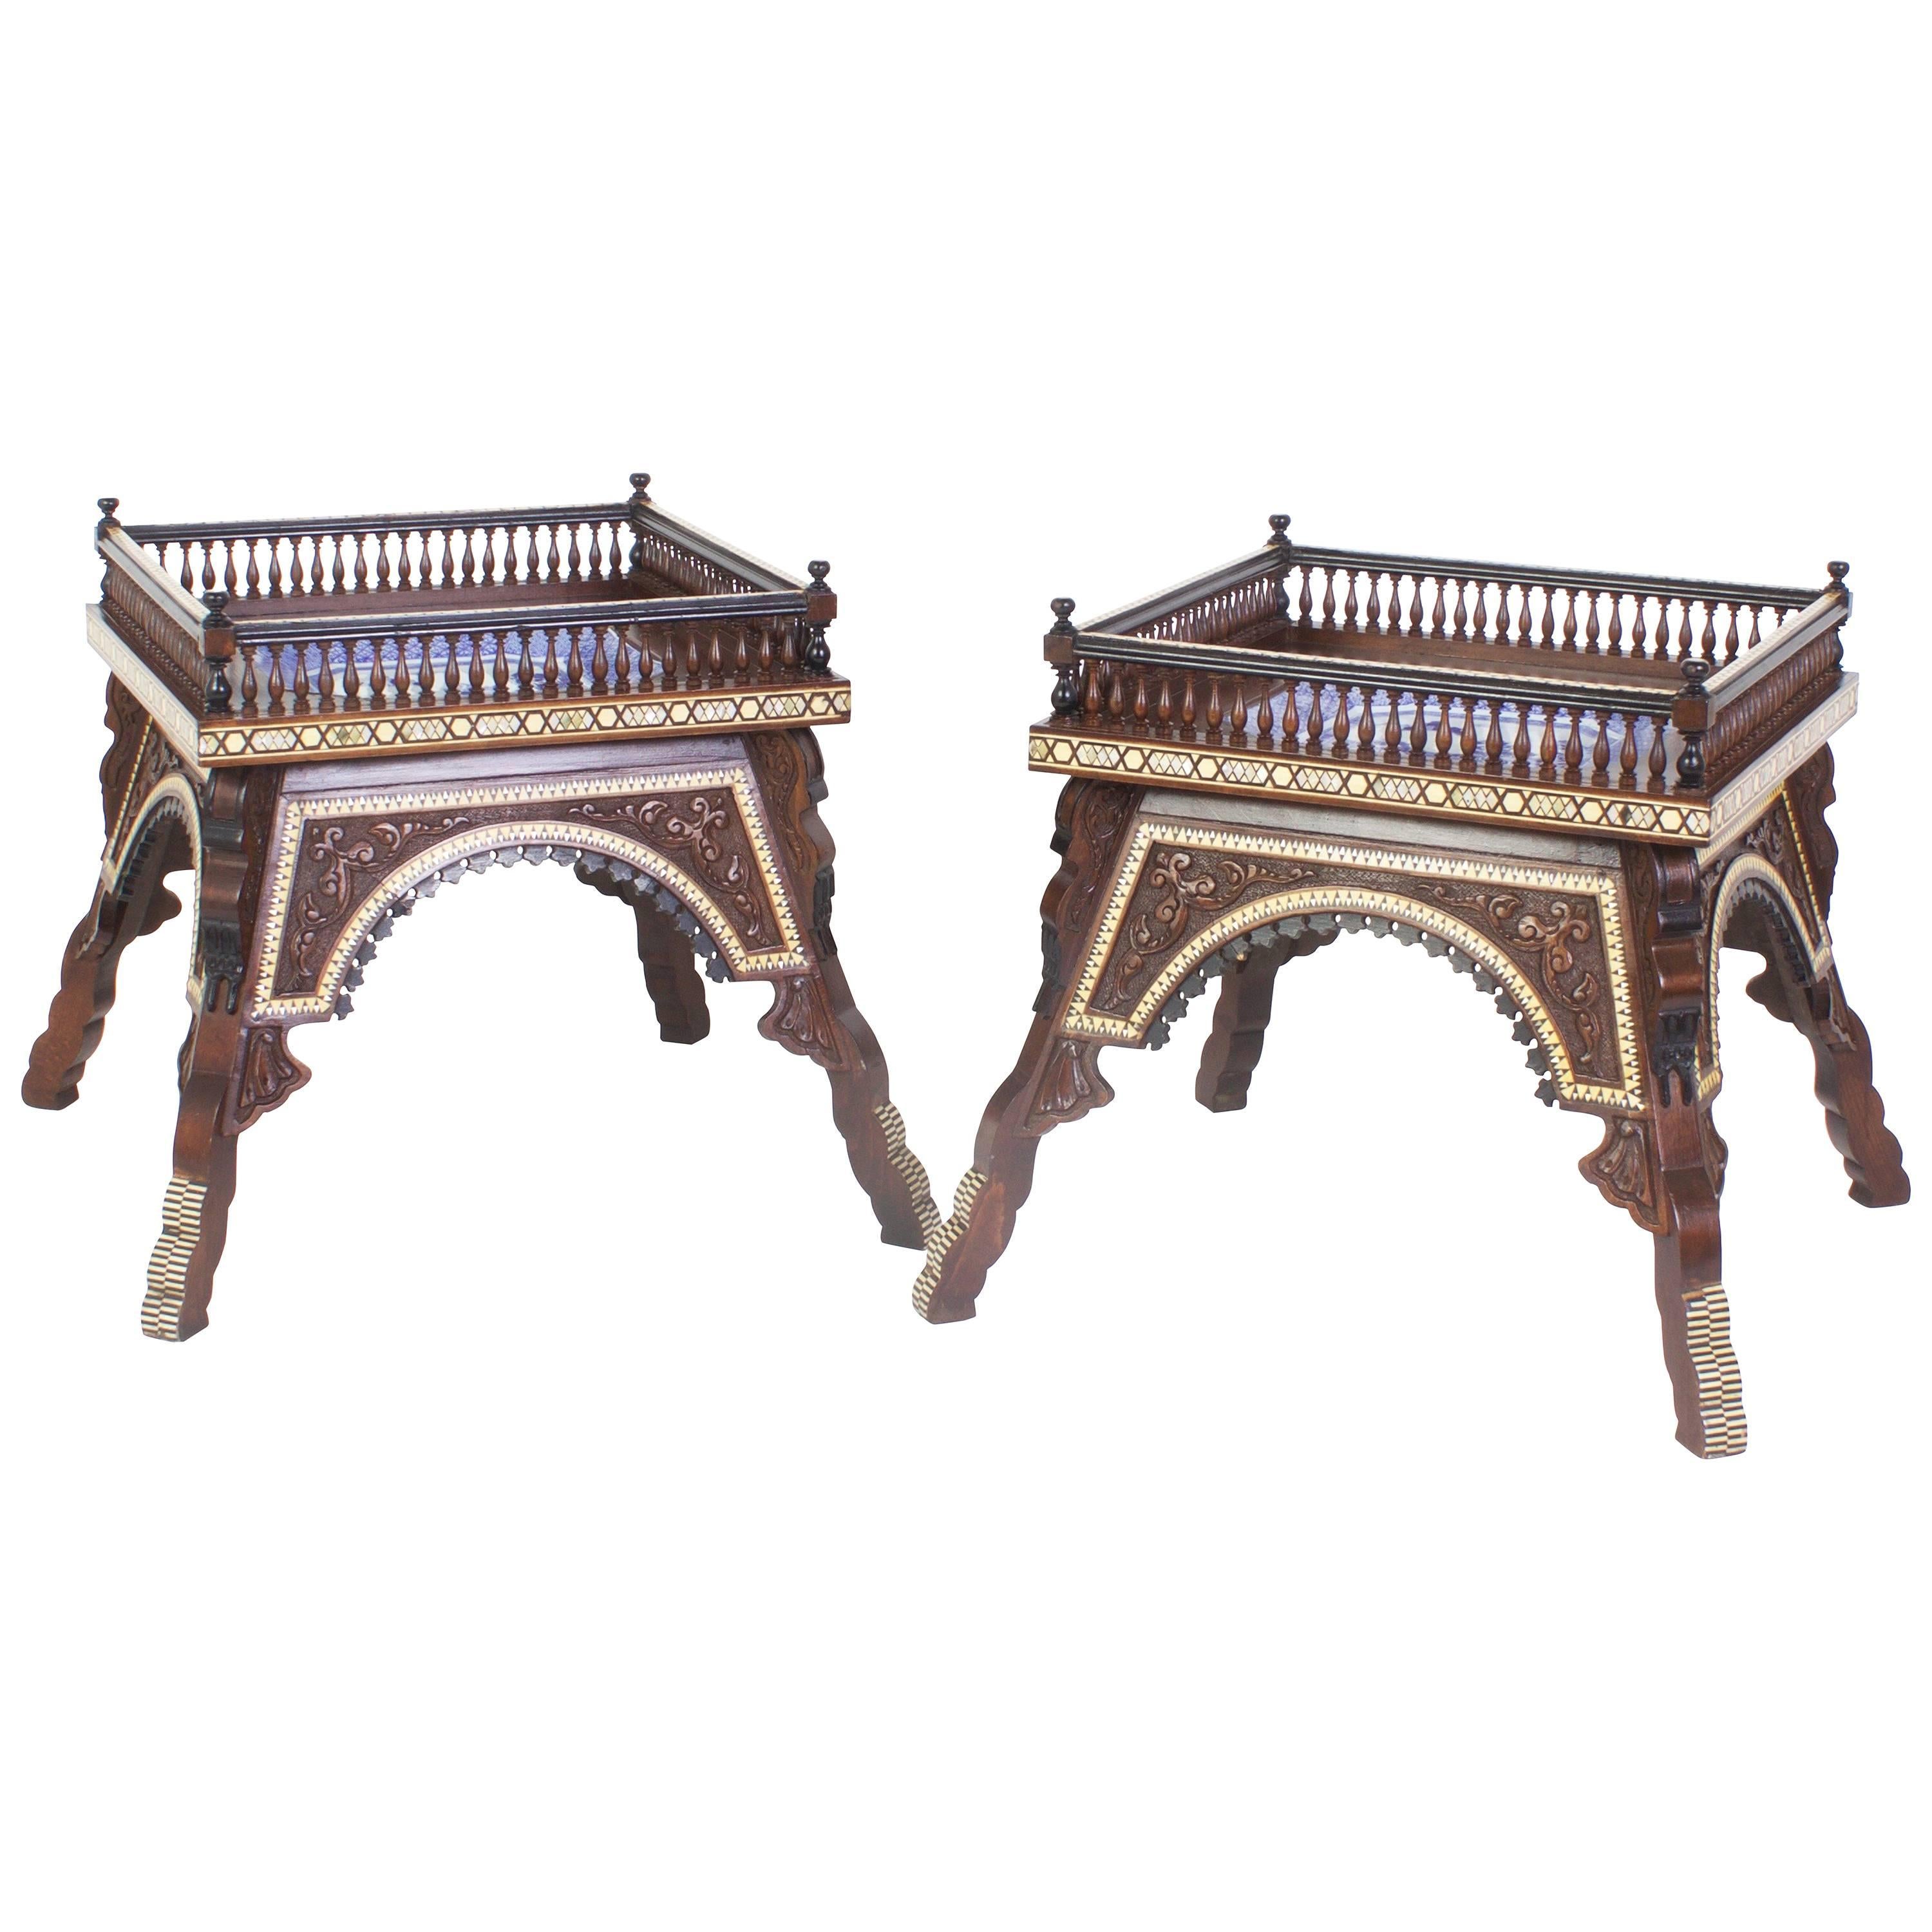 Moorish Bone Inlaid Tables with Floral Carvings and Porcelain